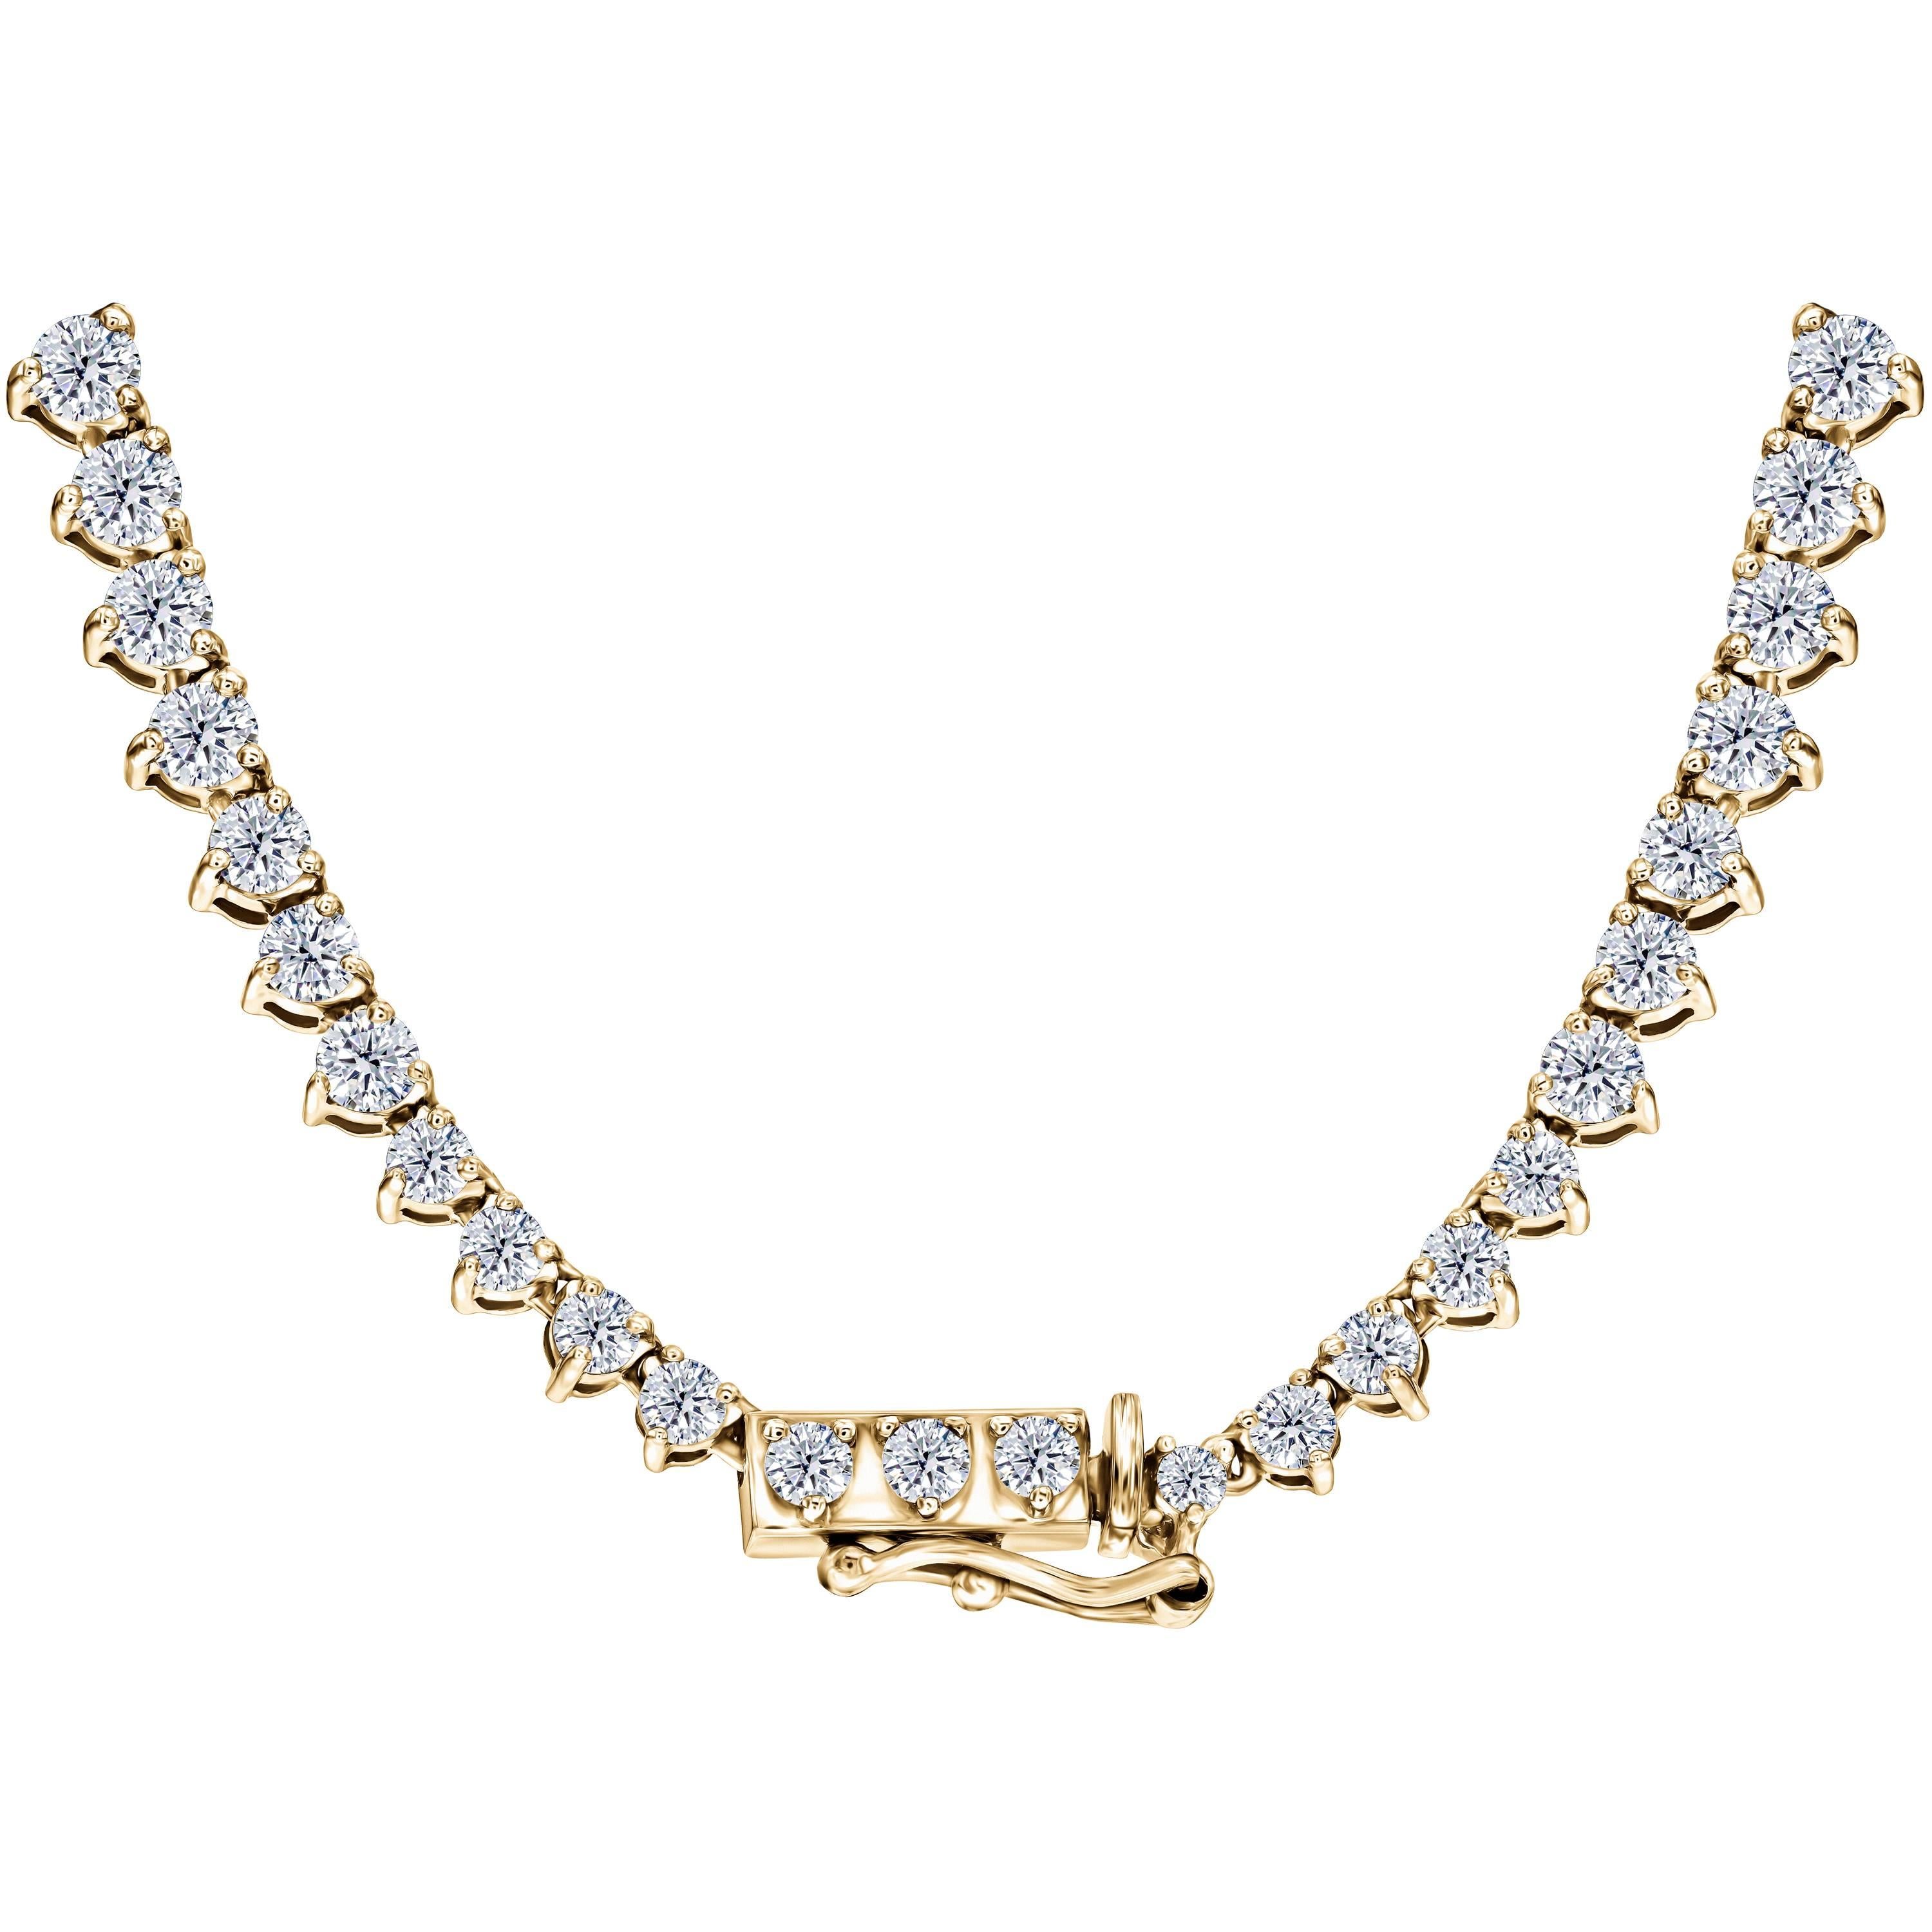 Made to order, this Spectacular 17 inch 10 Carat Round Brilliant G / H-SI Diamond Graduated Necklace featuring White Diamonds set with three Claws in 18 Karat Yellow Gold. Also available in White and Rose Gold. British Hallmarked.


